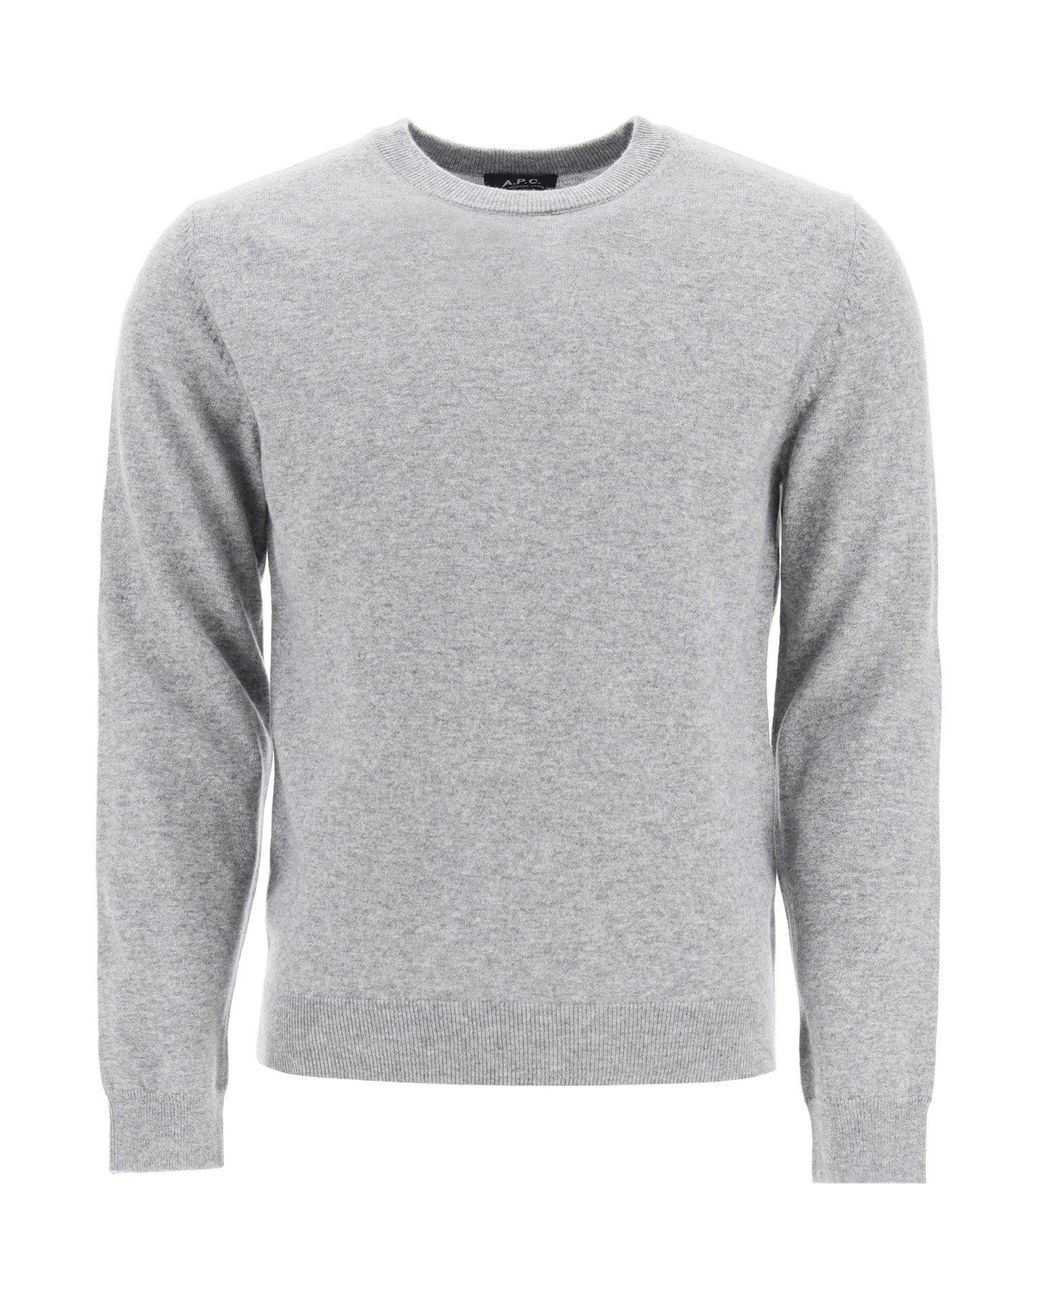 A.P.C. Cashmere Crewneck Knit Sweater in Grey (Gray) for Men - Save 6% ...